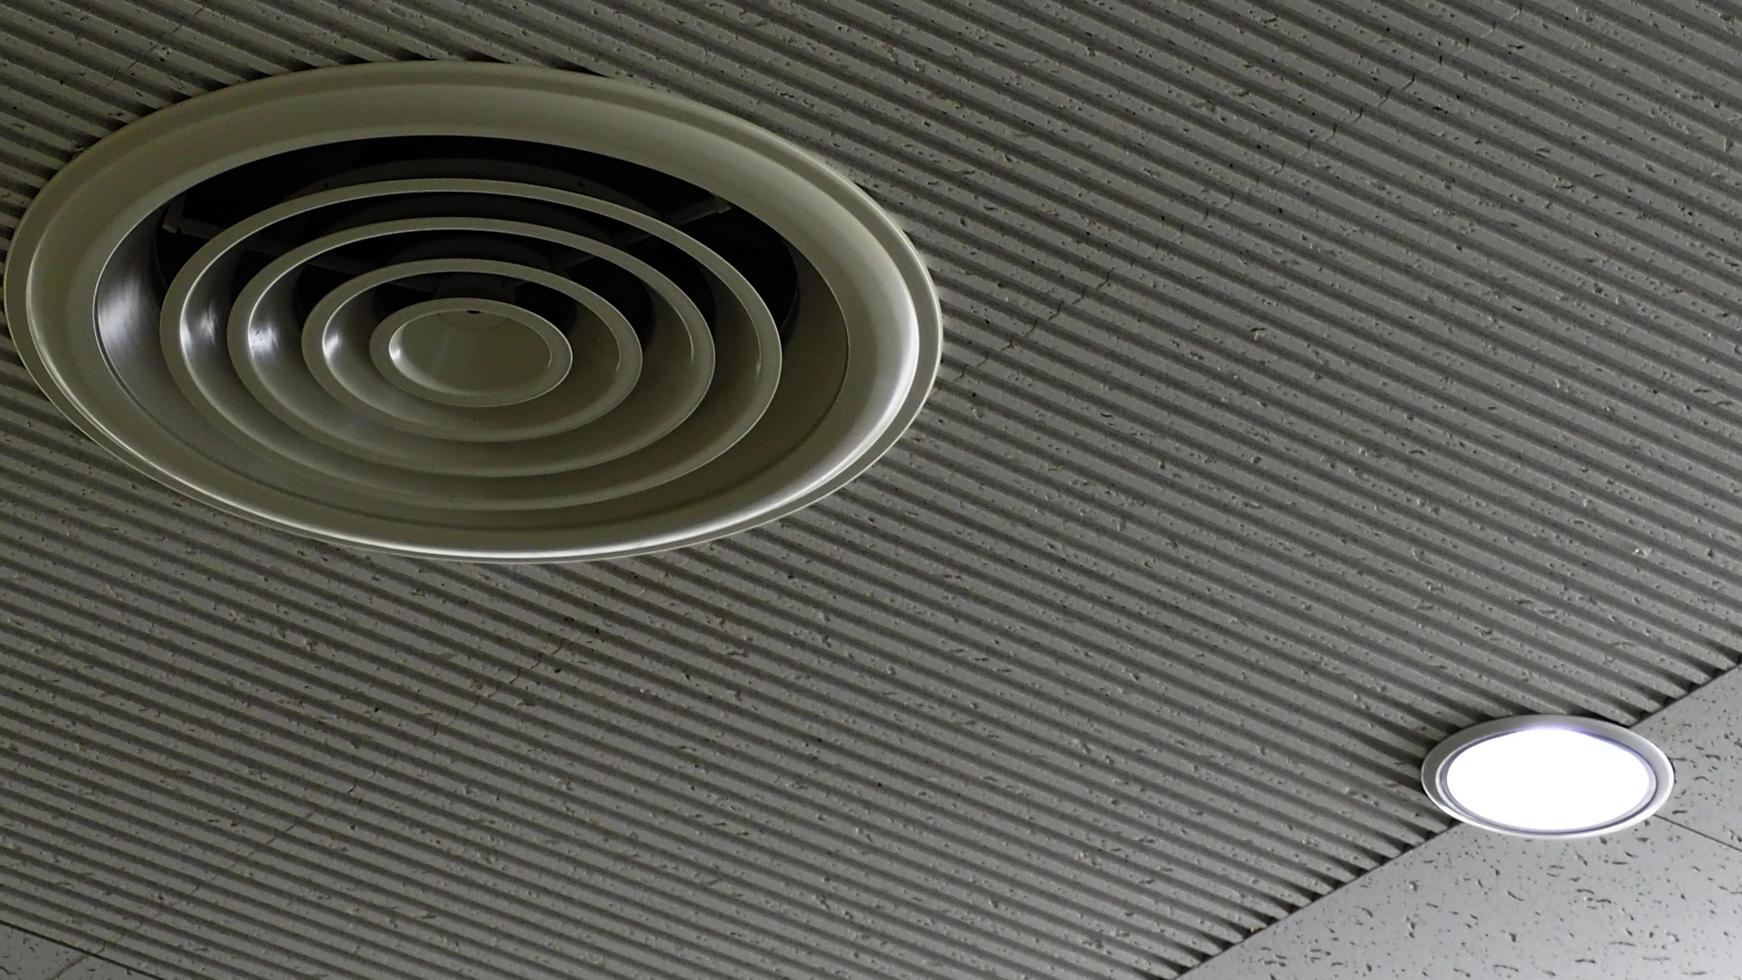 Air duct on ceiling in the mall or hospital. Air conditioner install on gypsum ceiling near ceiling lamp. Building interior concept. Air heading unit on gypsum wall. Cool system in the building. photo